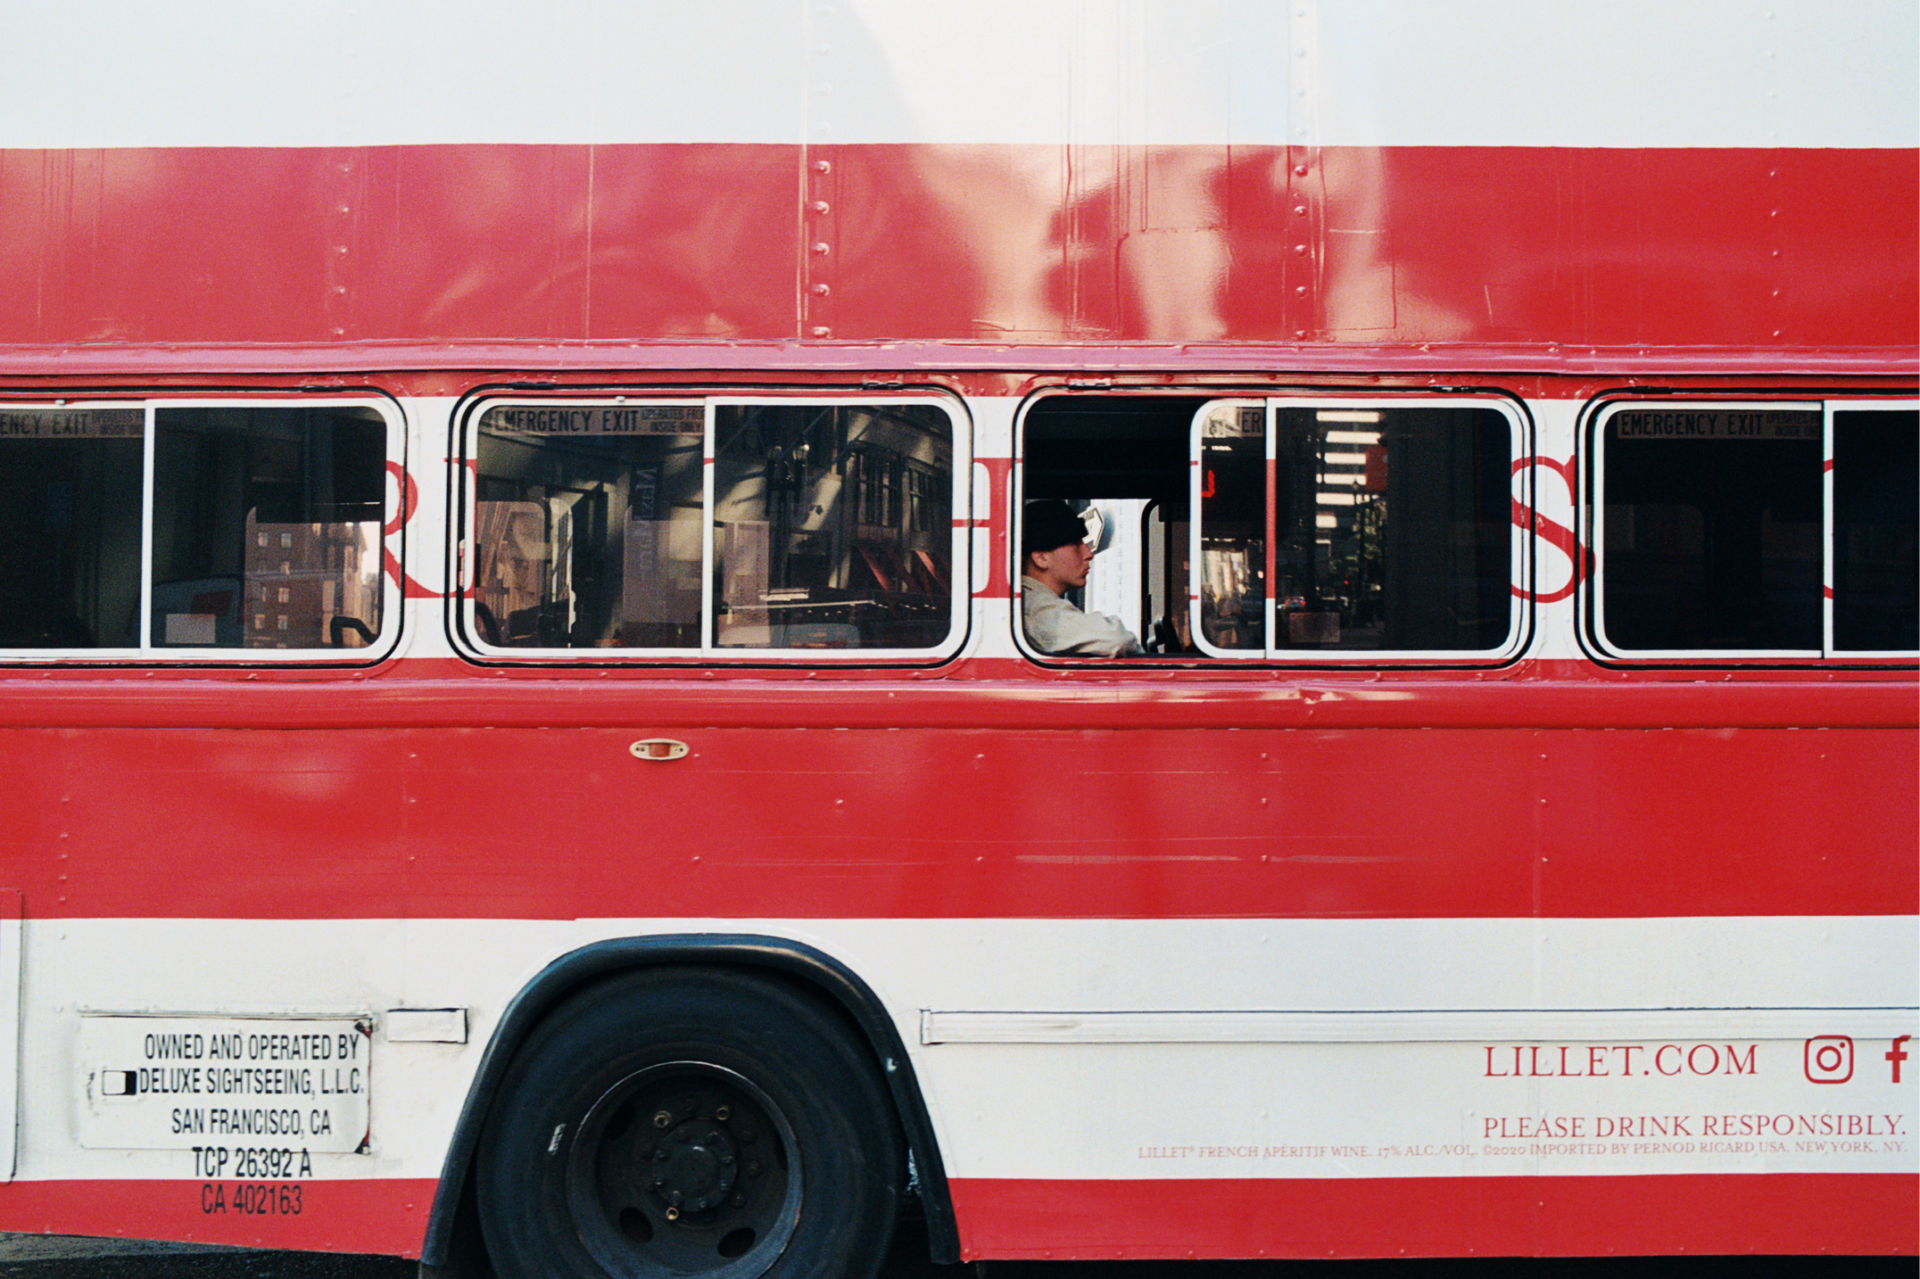 Photograph of a red and white bus with a man staring forward in one of the windows